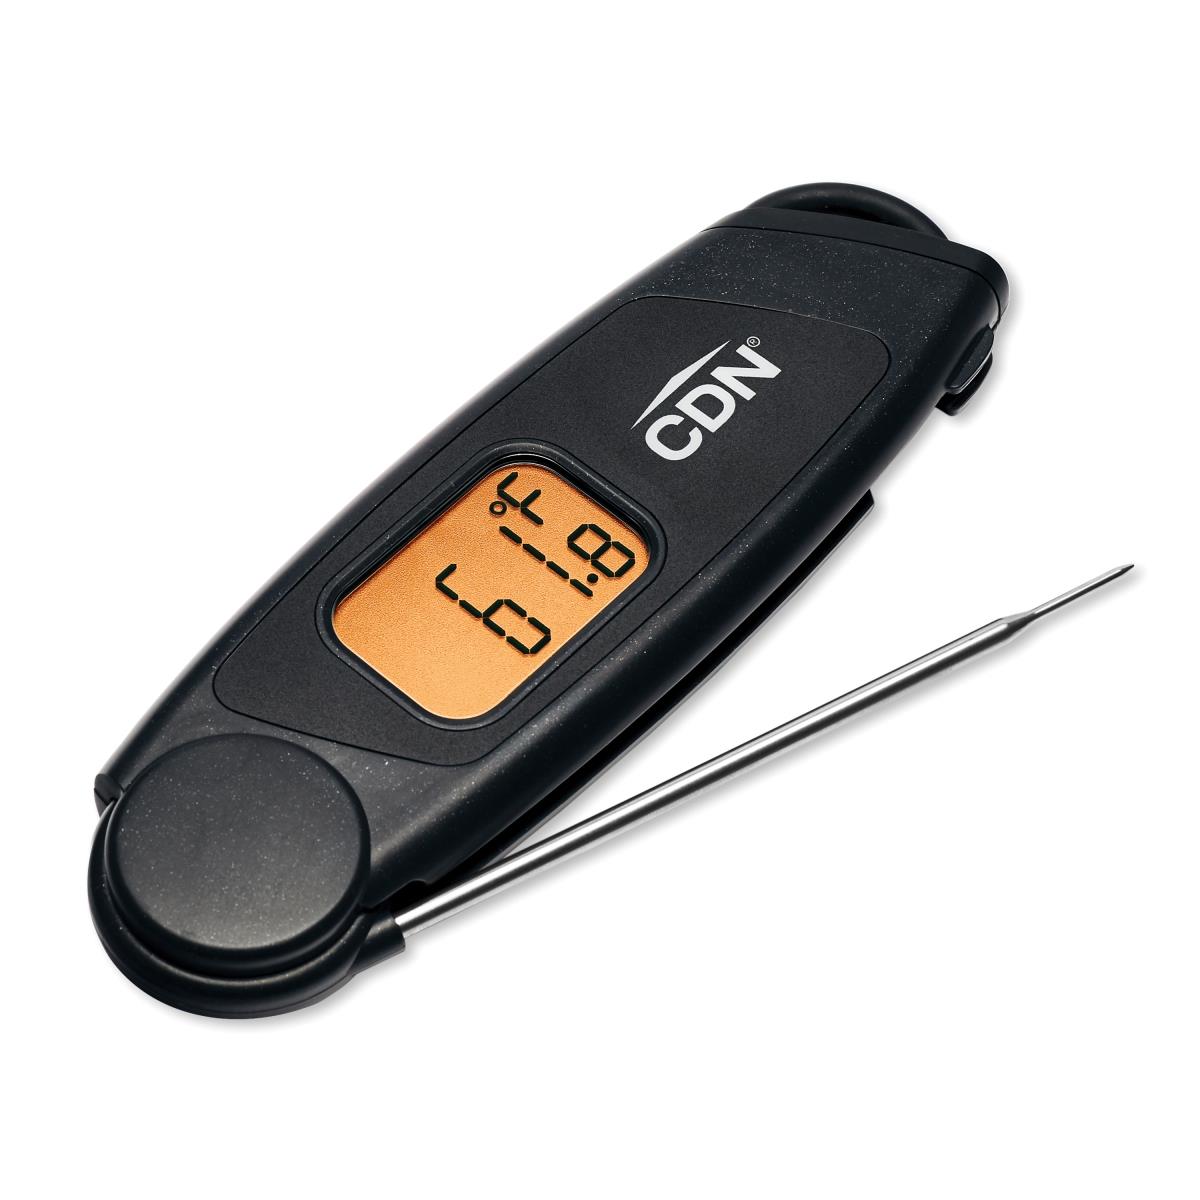 Picture of CDN TCTW572 Waterproof Folding Thermocouple Thermometer, Black